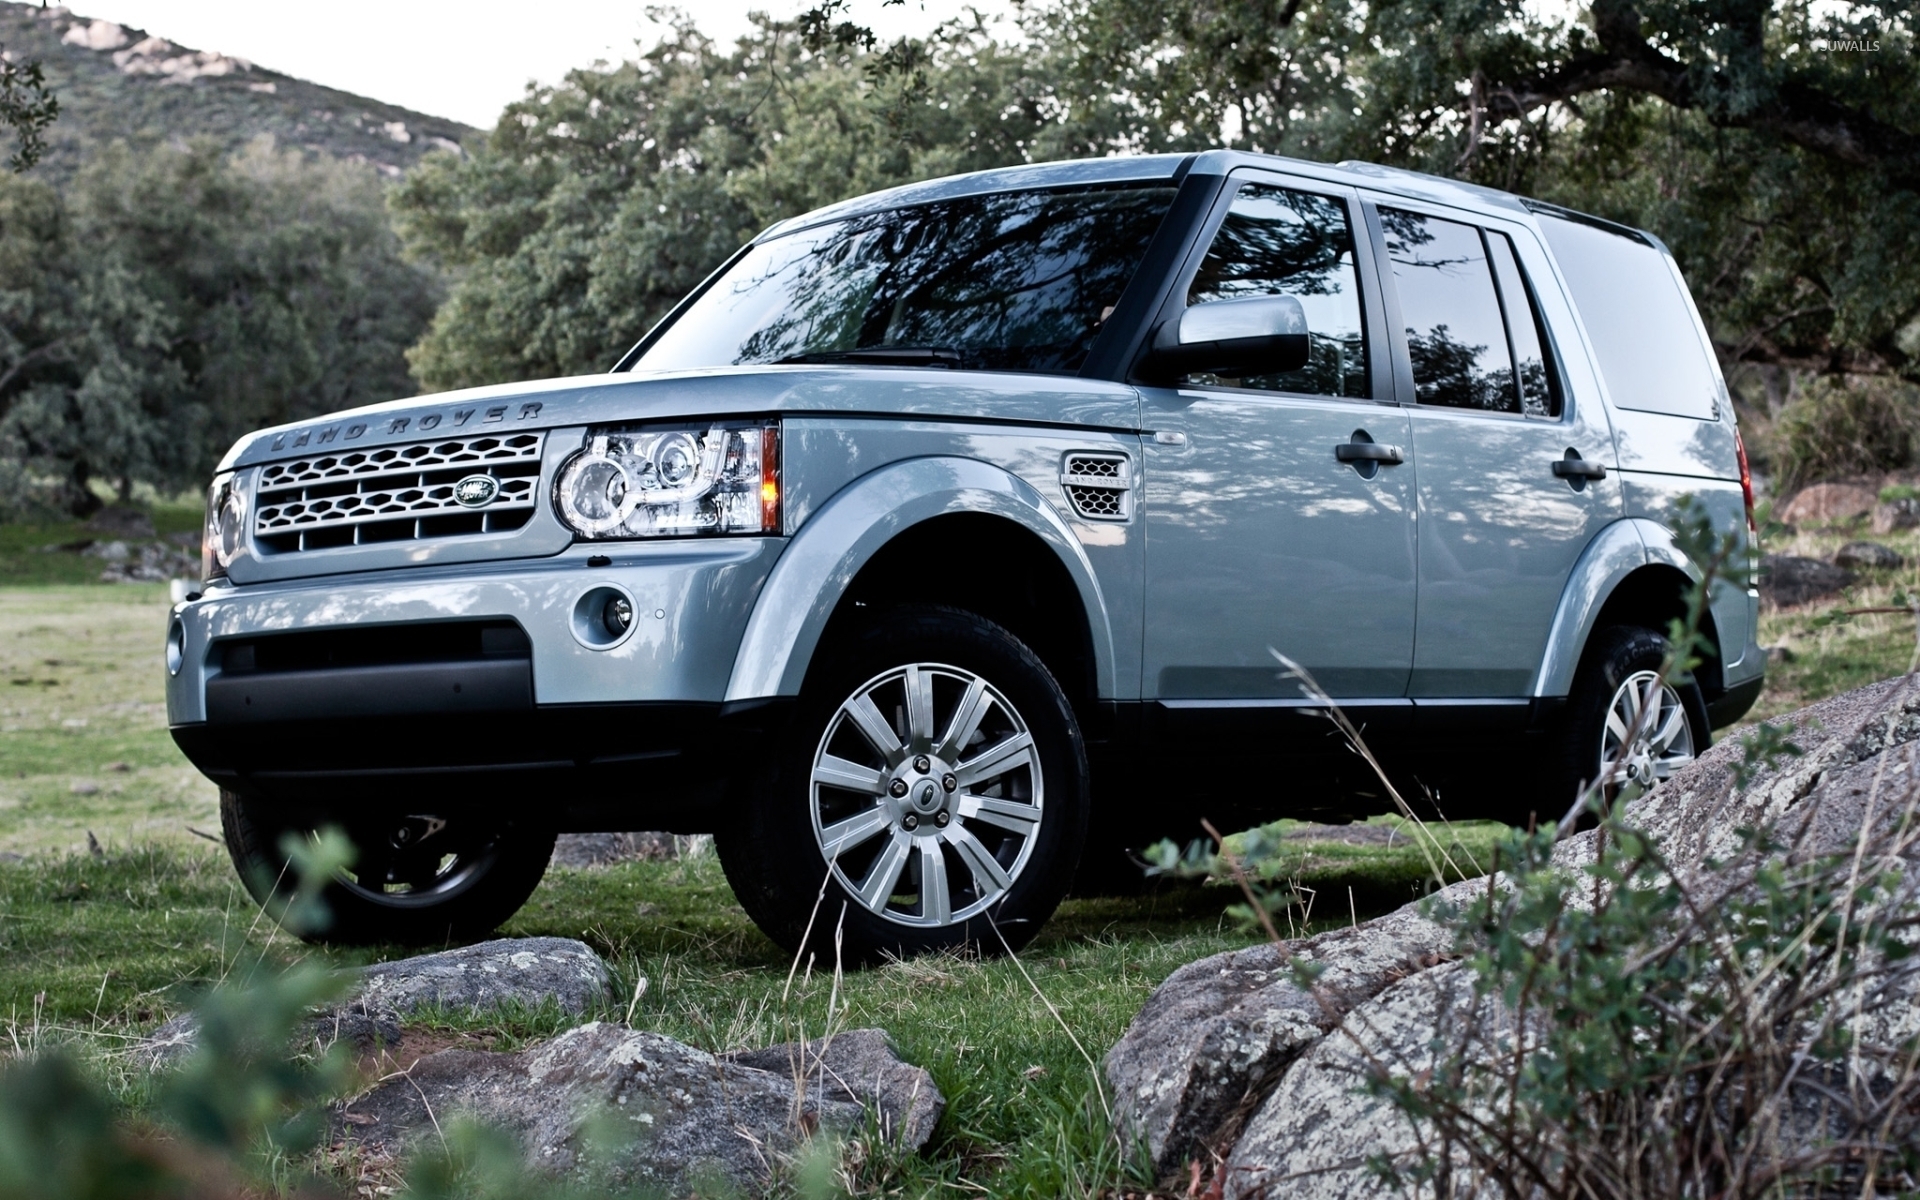 Land Rover Discovery [4] wallpaper - Car wallpapers - #38407